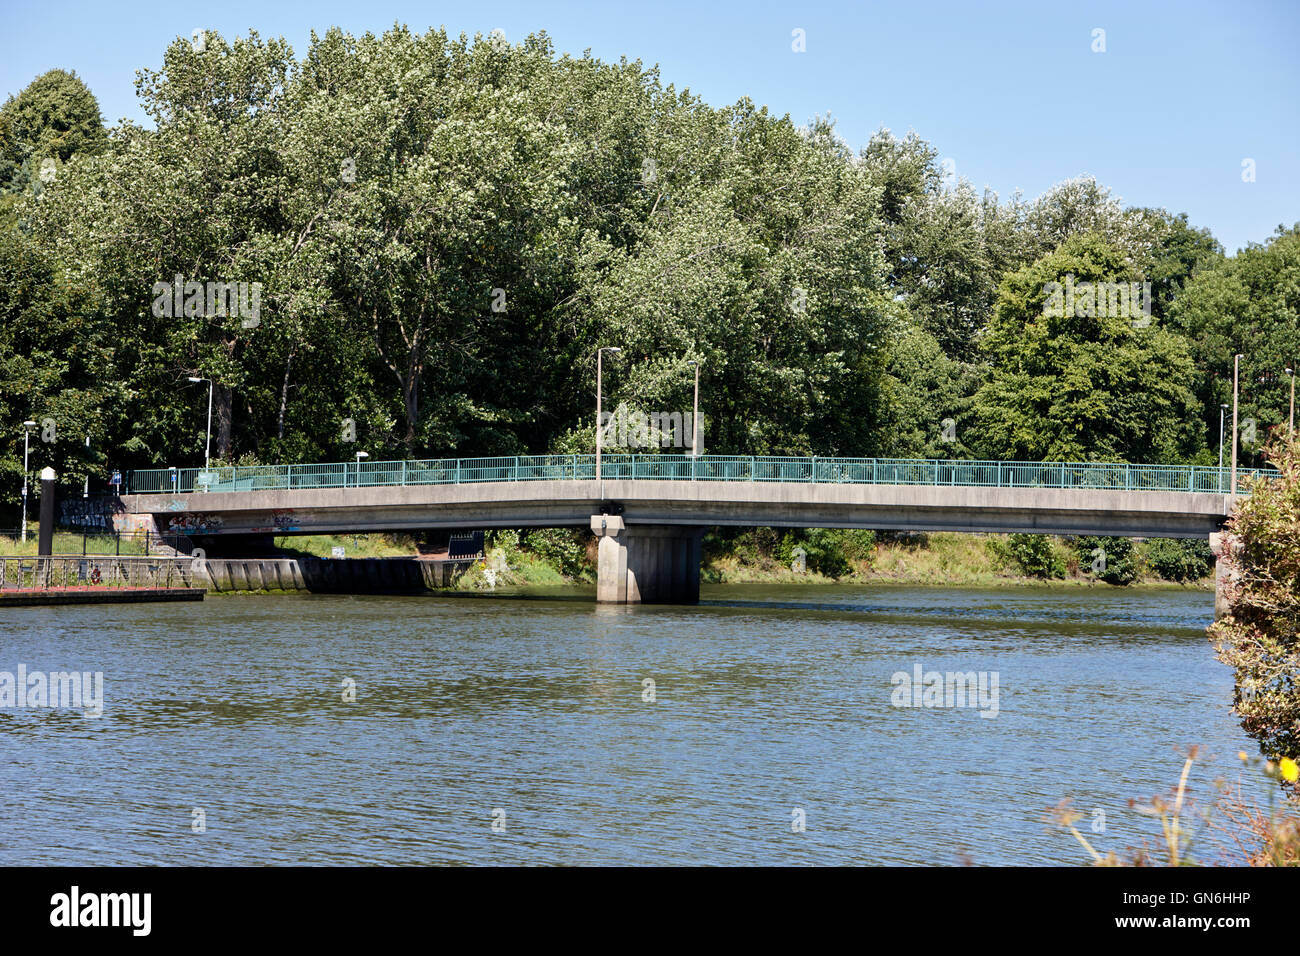 The governors bridge over the river lagan at stranmillis south belfast Stock Photo